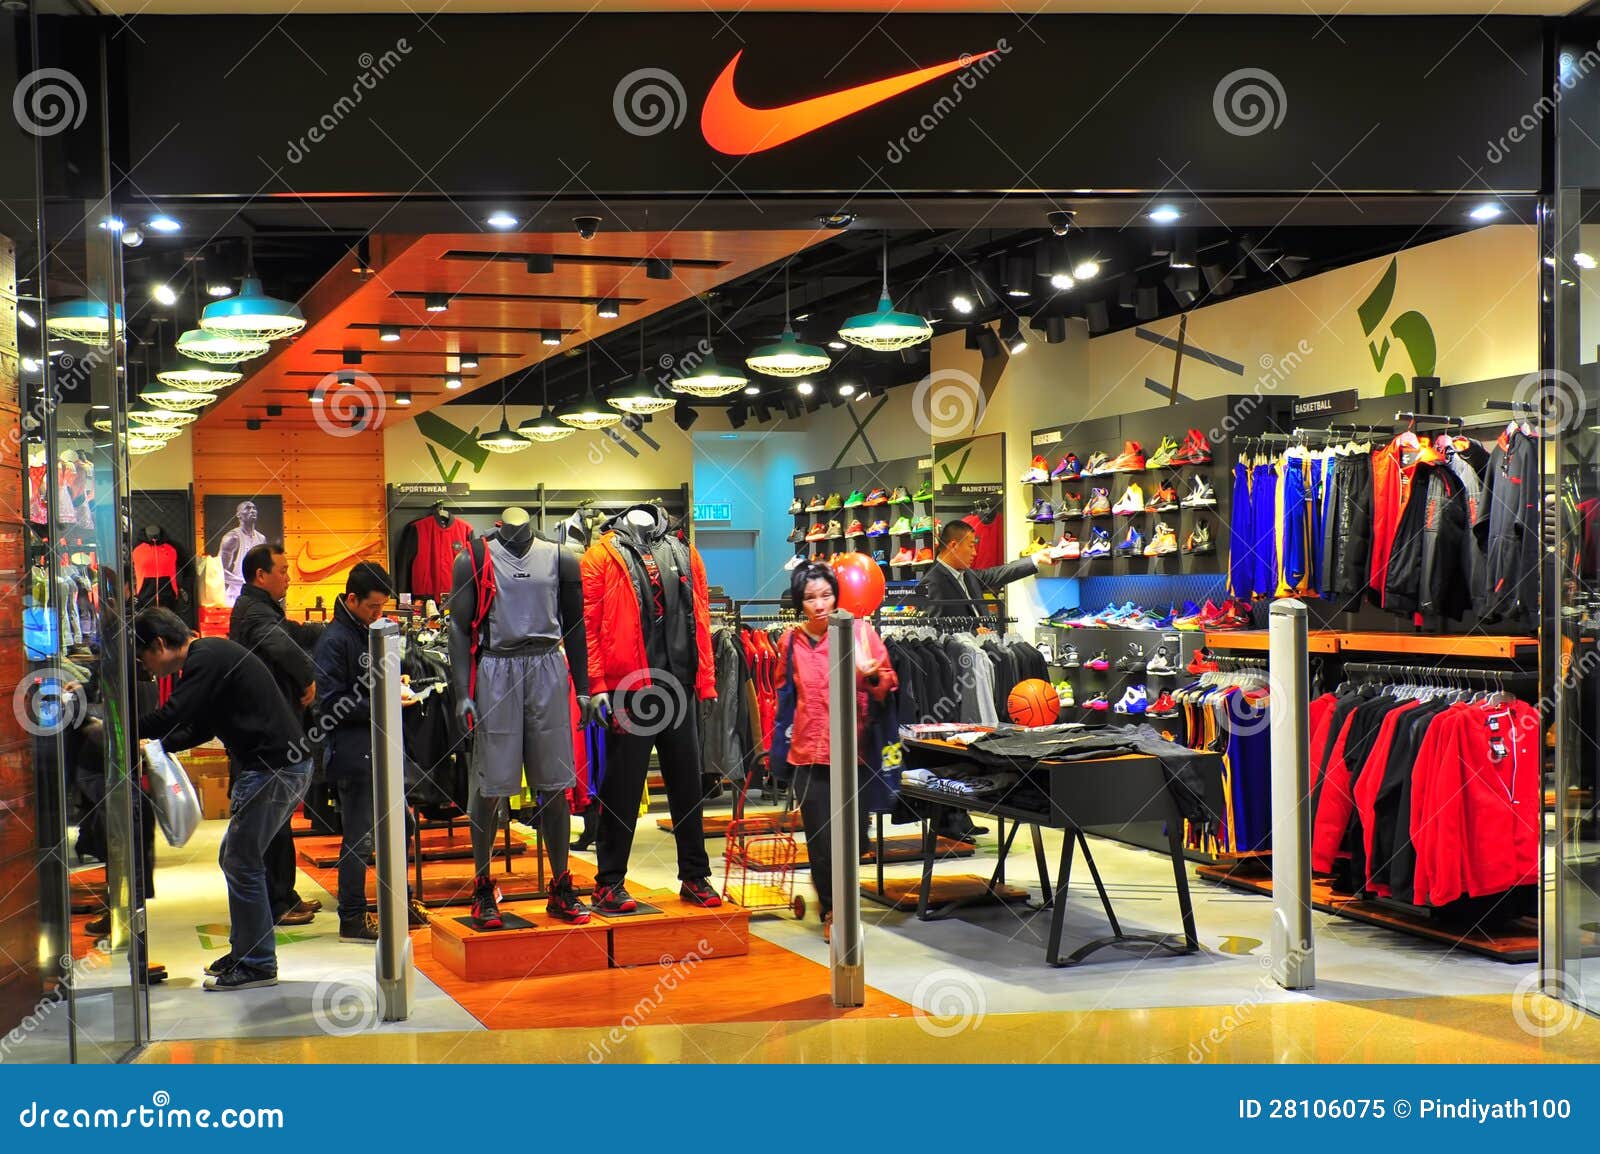 Nike Store Or Outlet Hong Kong Editorial Image - Image: 28106075